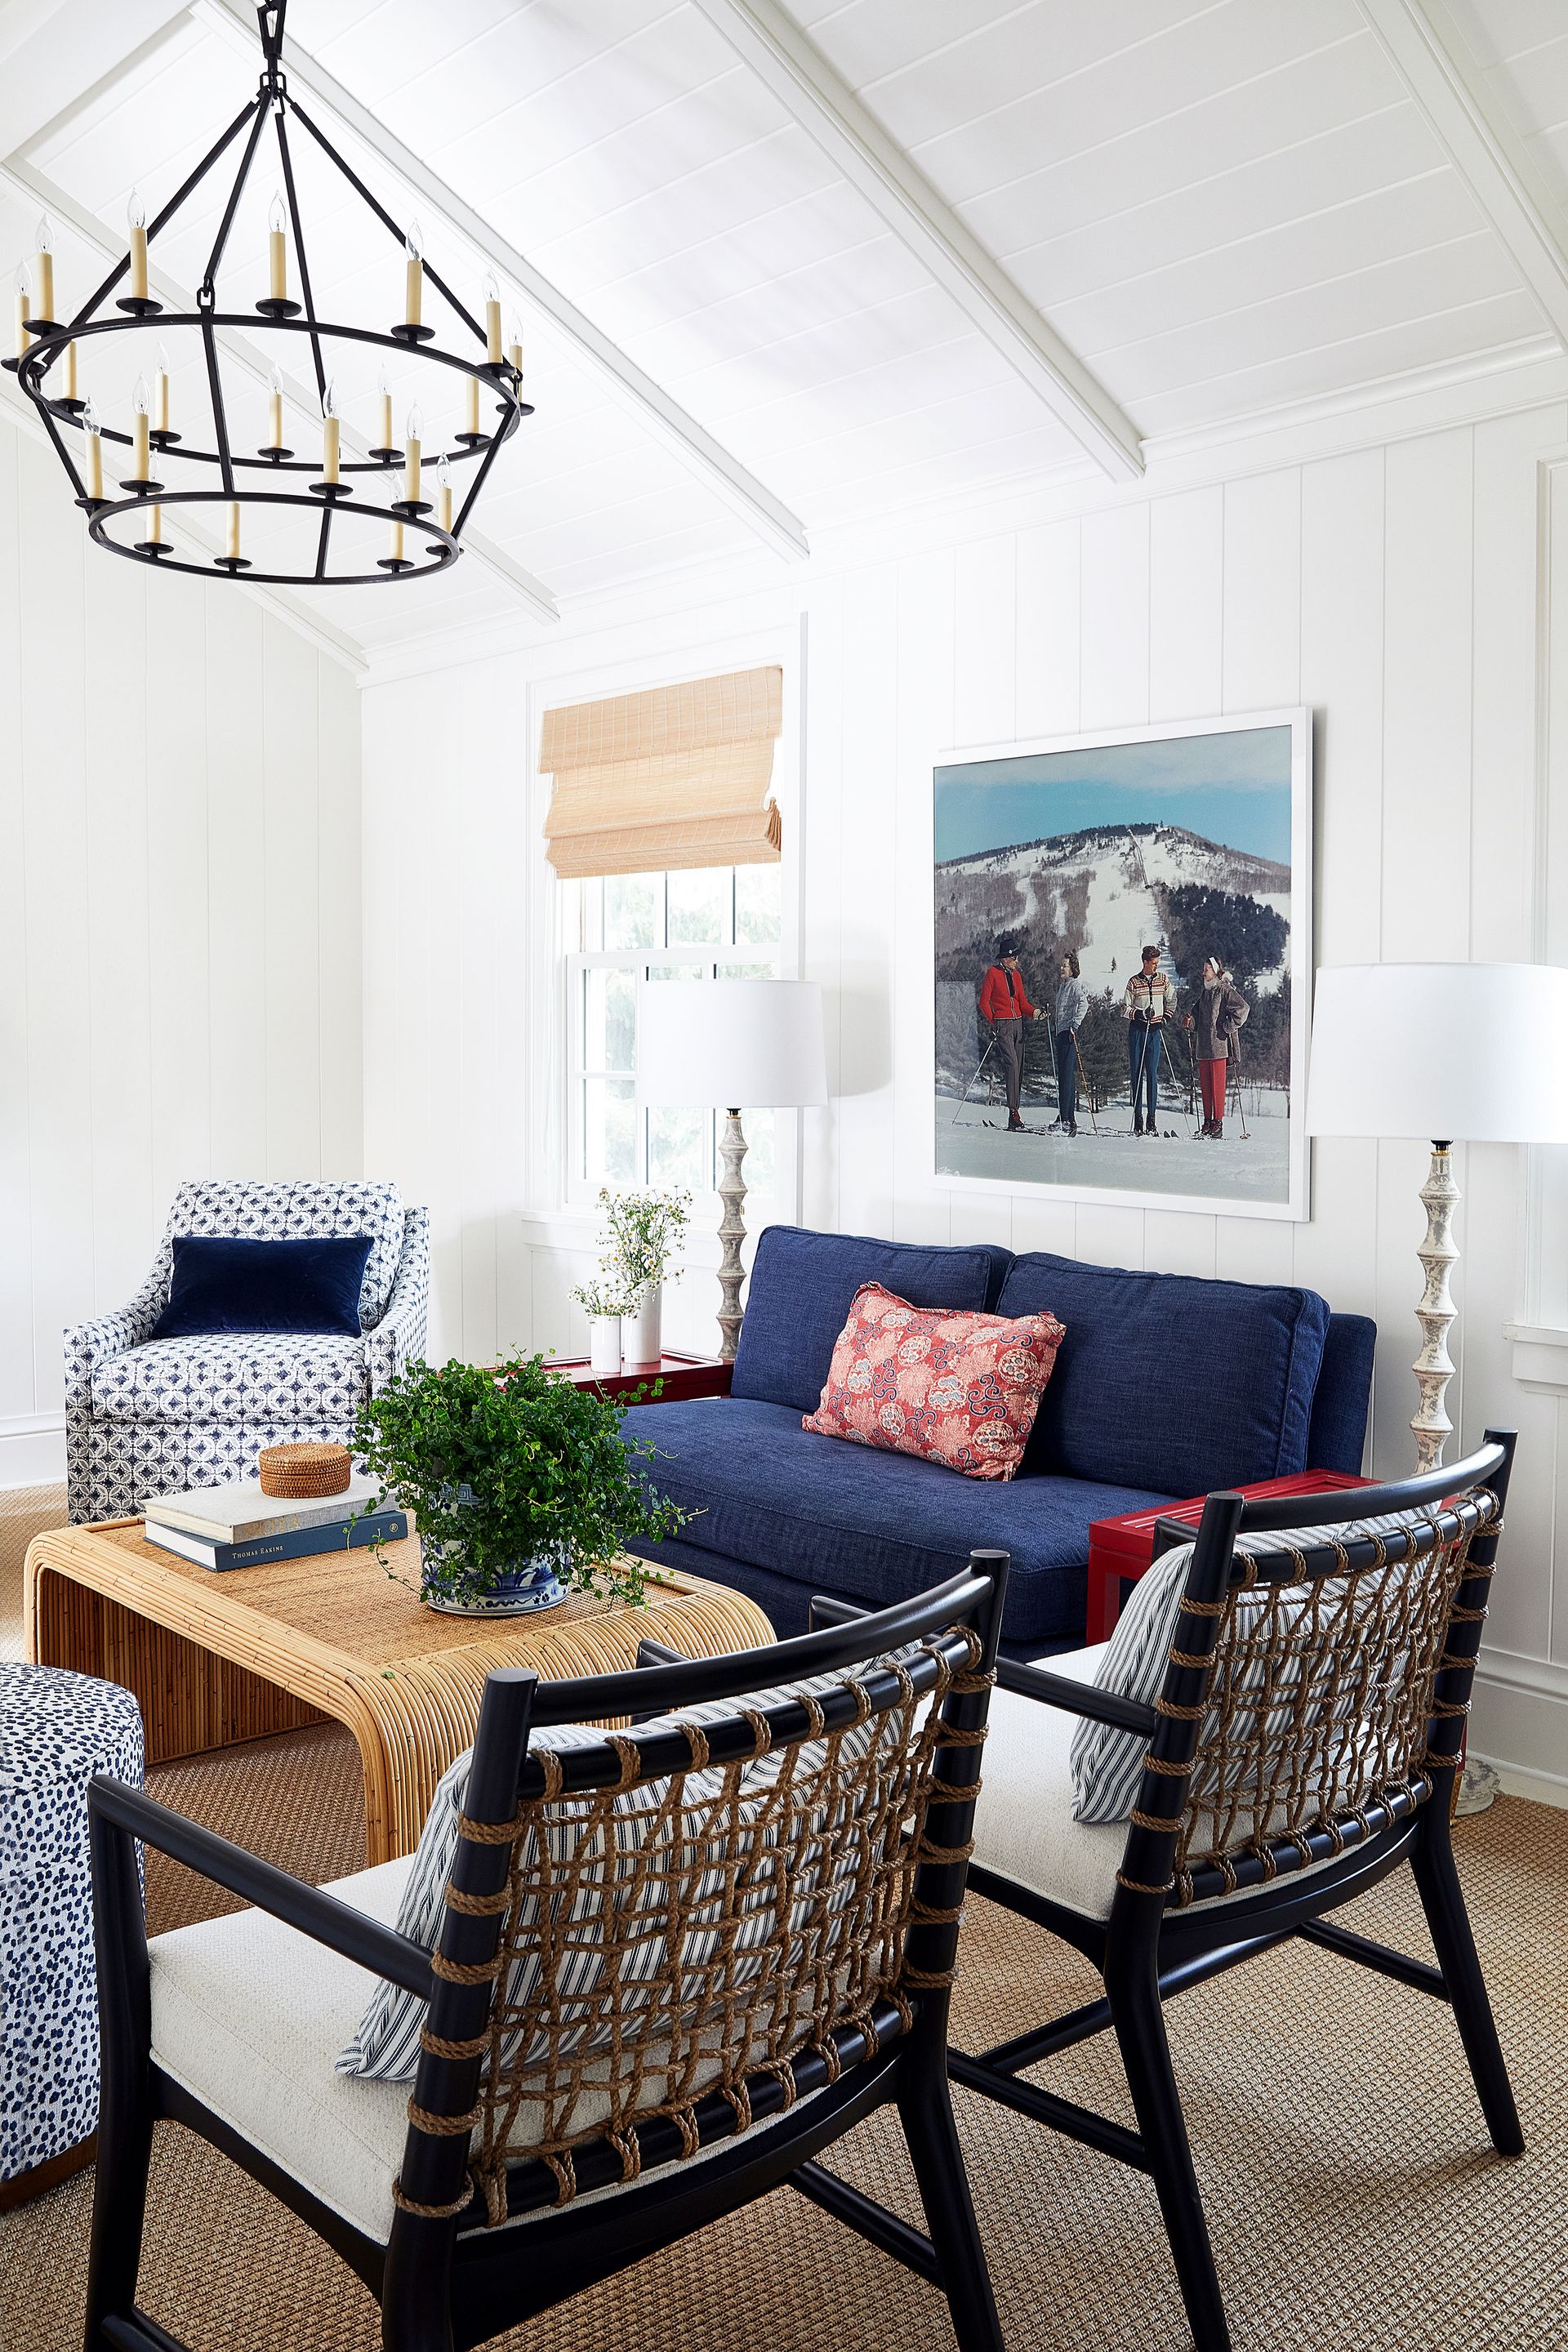 Tour a coach house that's big on style after its redesign